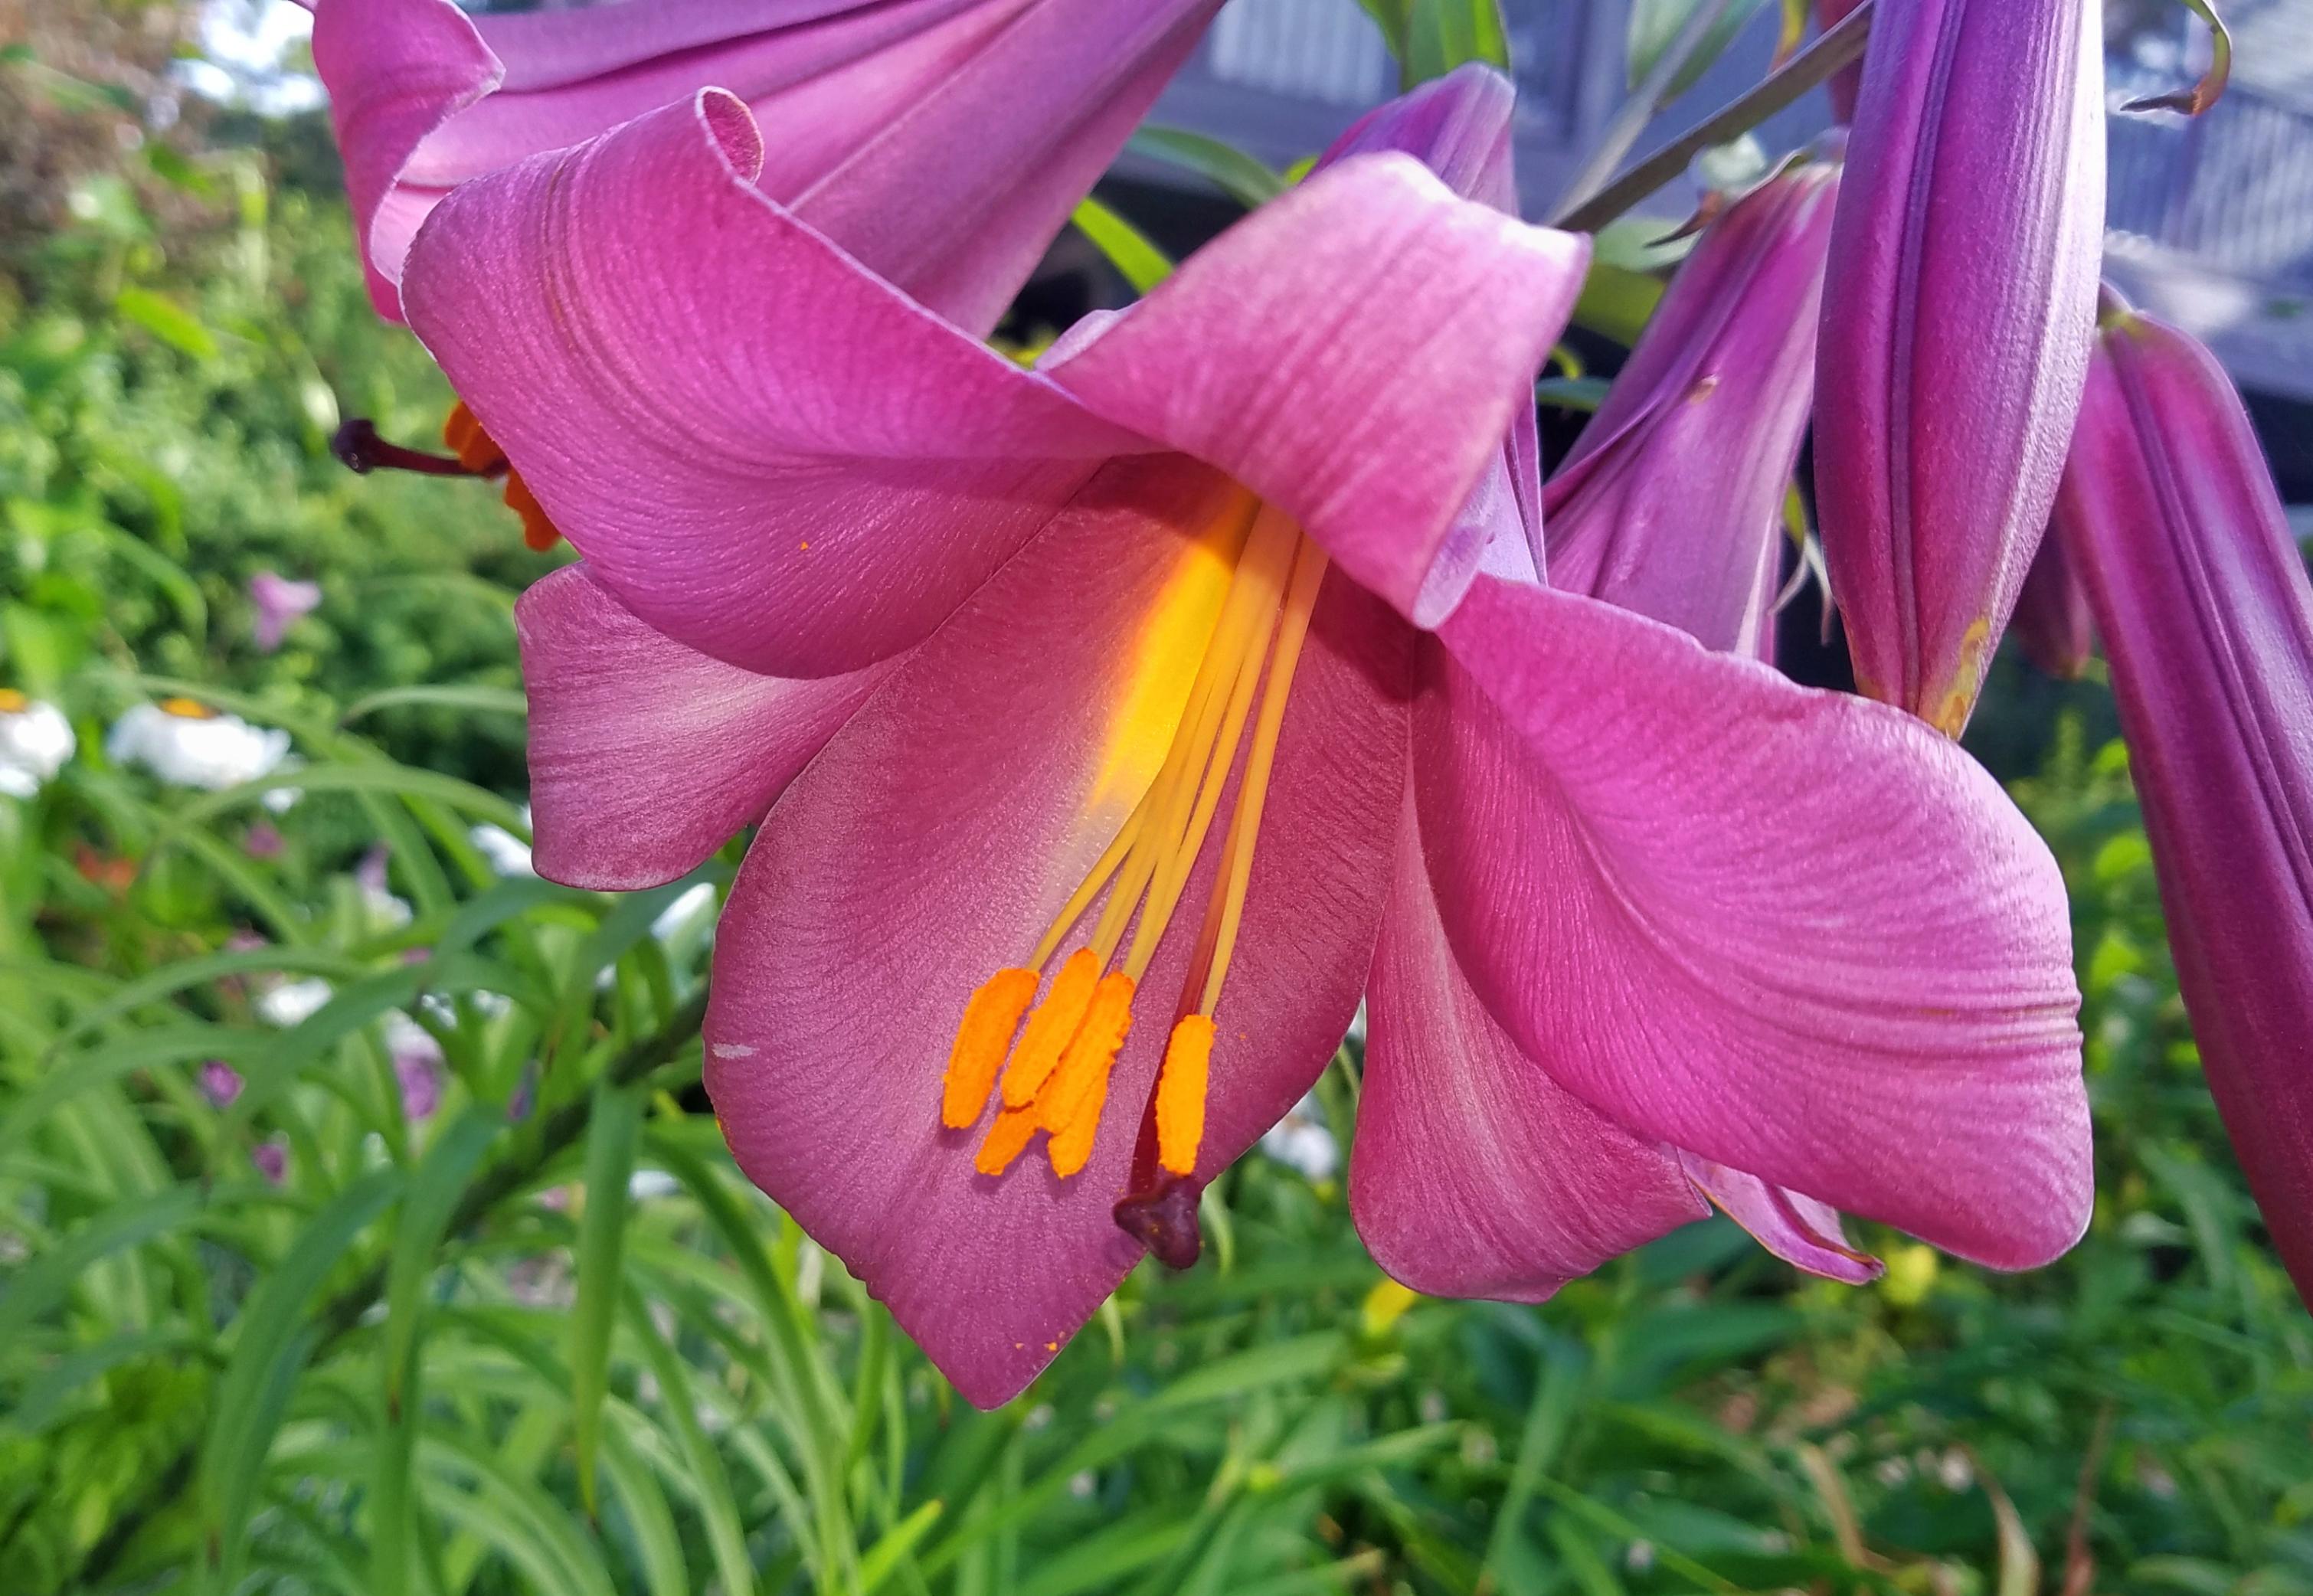 Lilies Asiatic Trumpet 'Pink Perfection' - Outdoor Lilies (Shipping begins Jan. 2021) from Leo Berbee Bulb Company